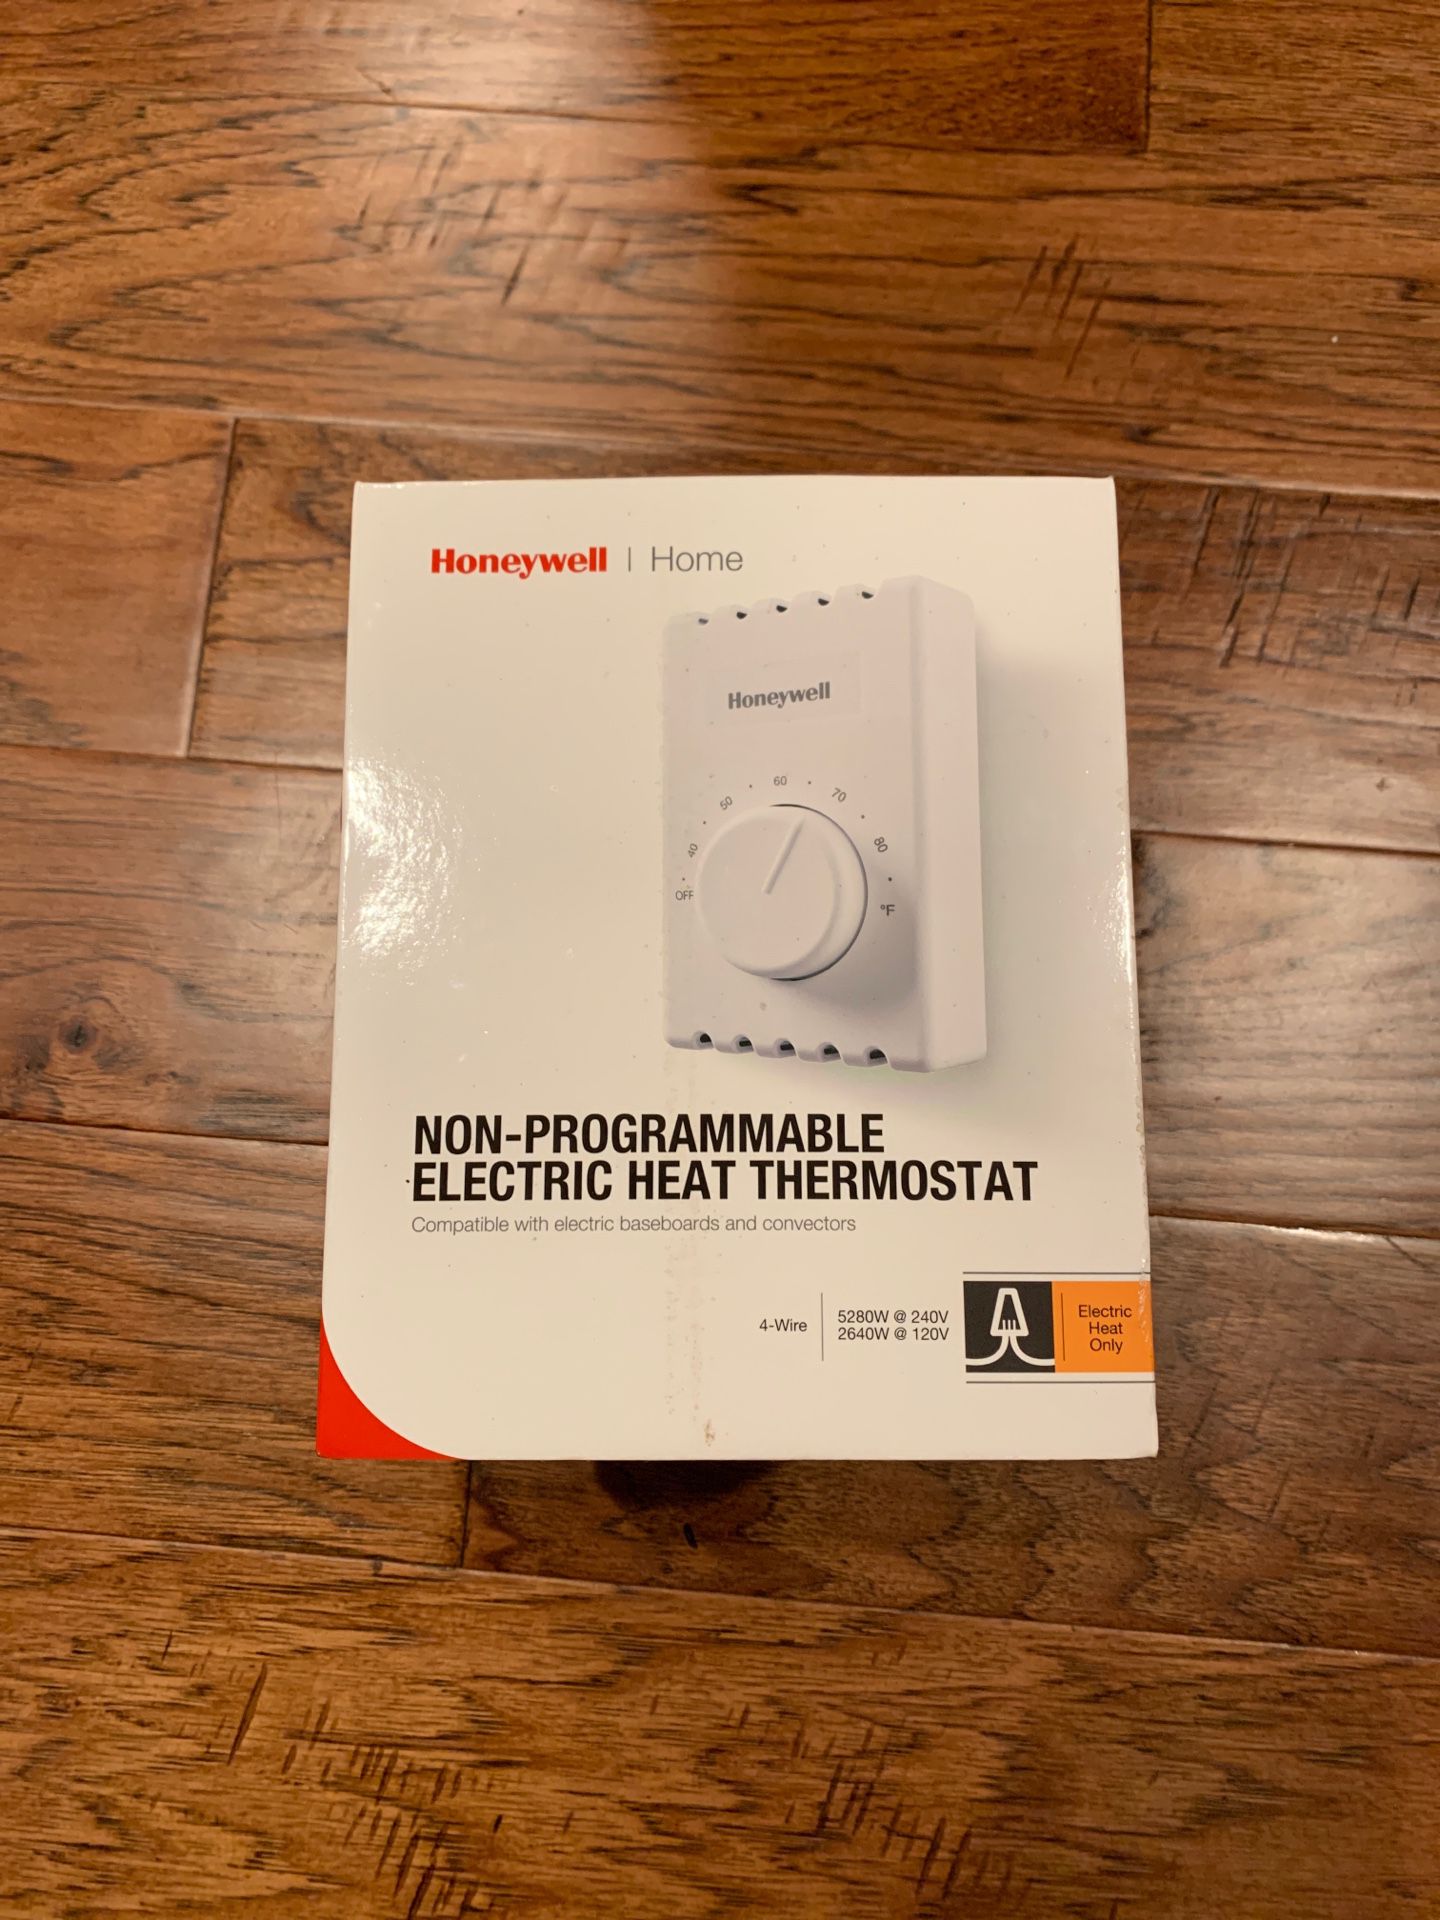 3 brand new Honeywell electric thermostats